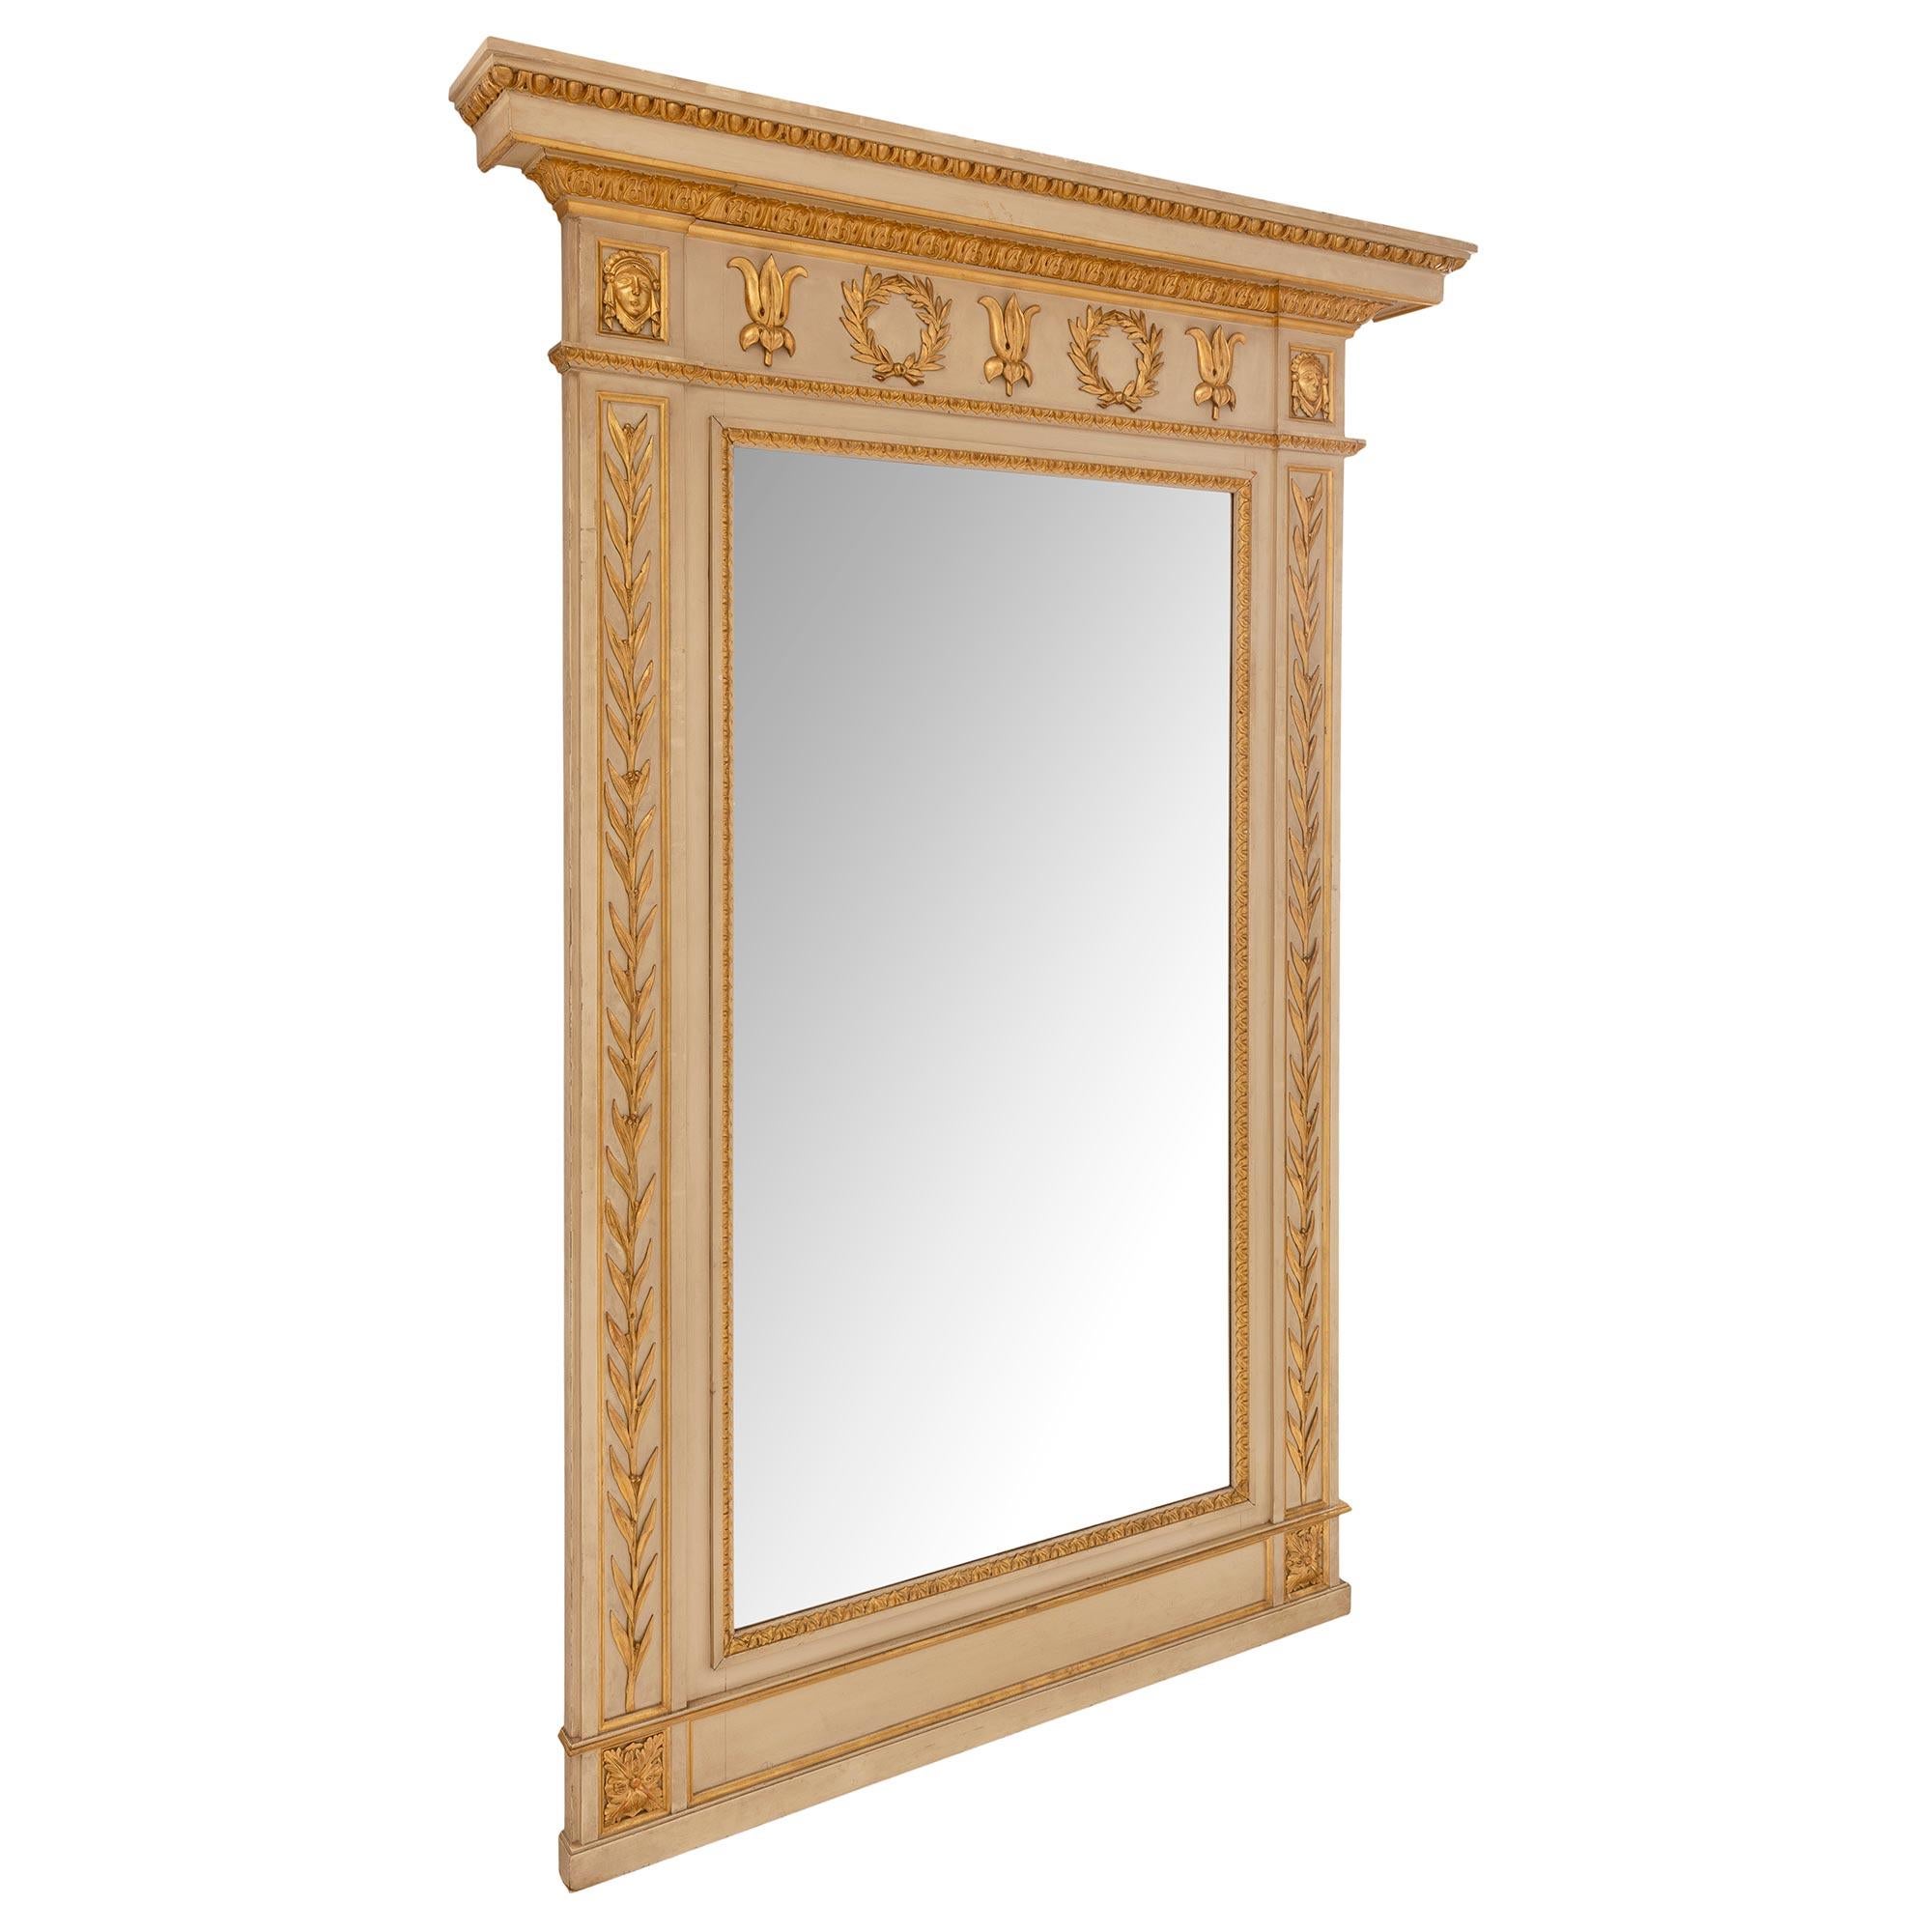 Italian 19th Century Neoclassical Style Patinated and Giltwood Mirror In Good Condition For Sale In West Palm Beach, FL